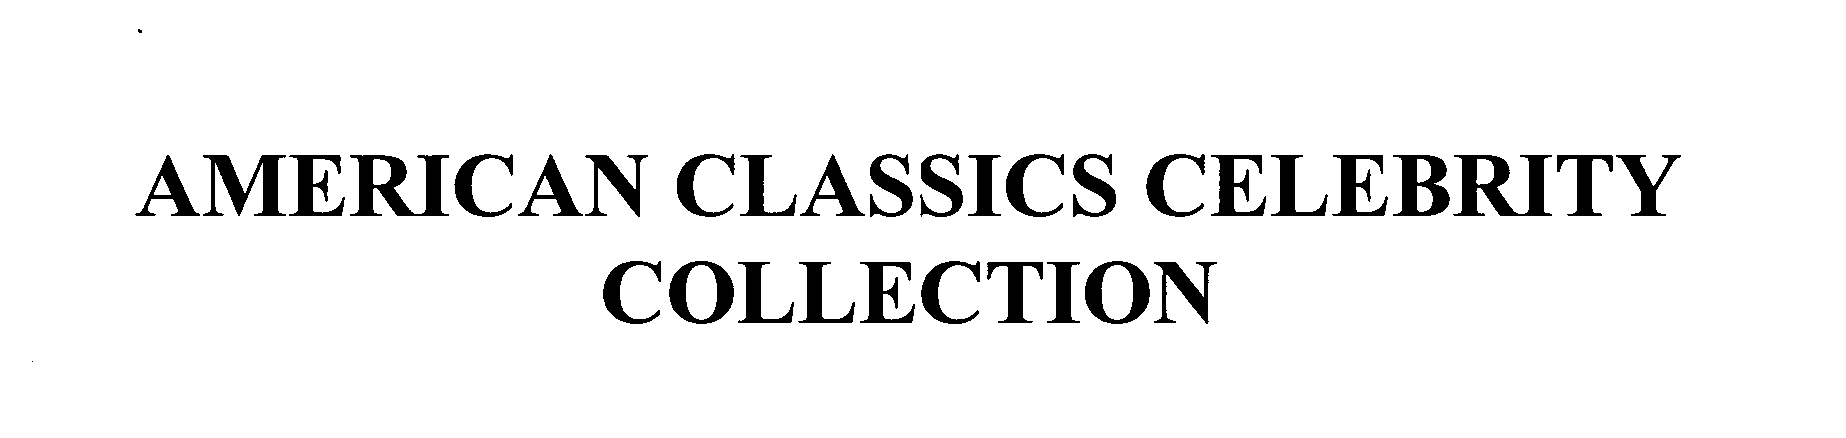 AMERICAN CLASSICS CELEBRITY COLLECTION